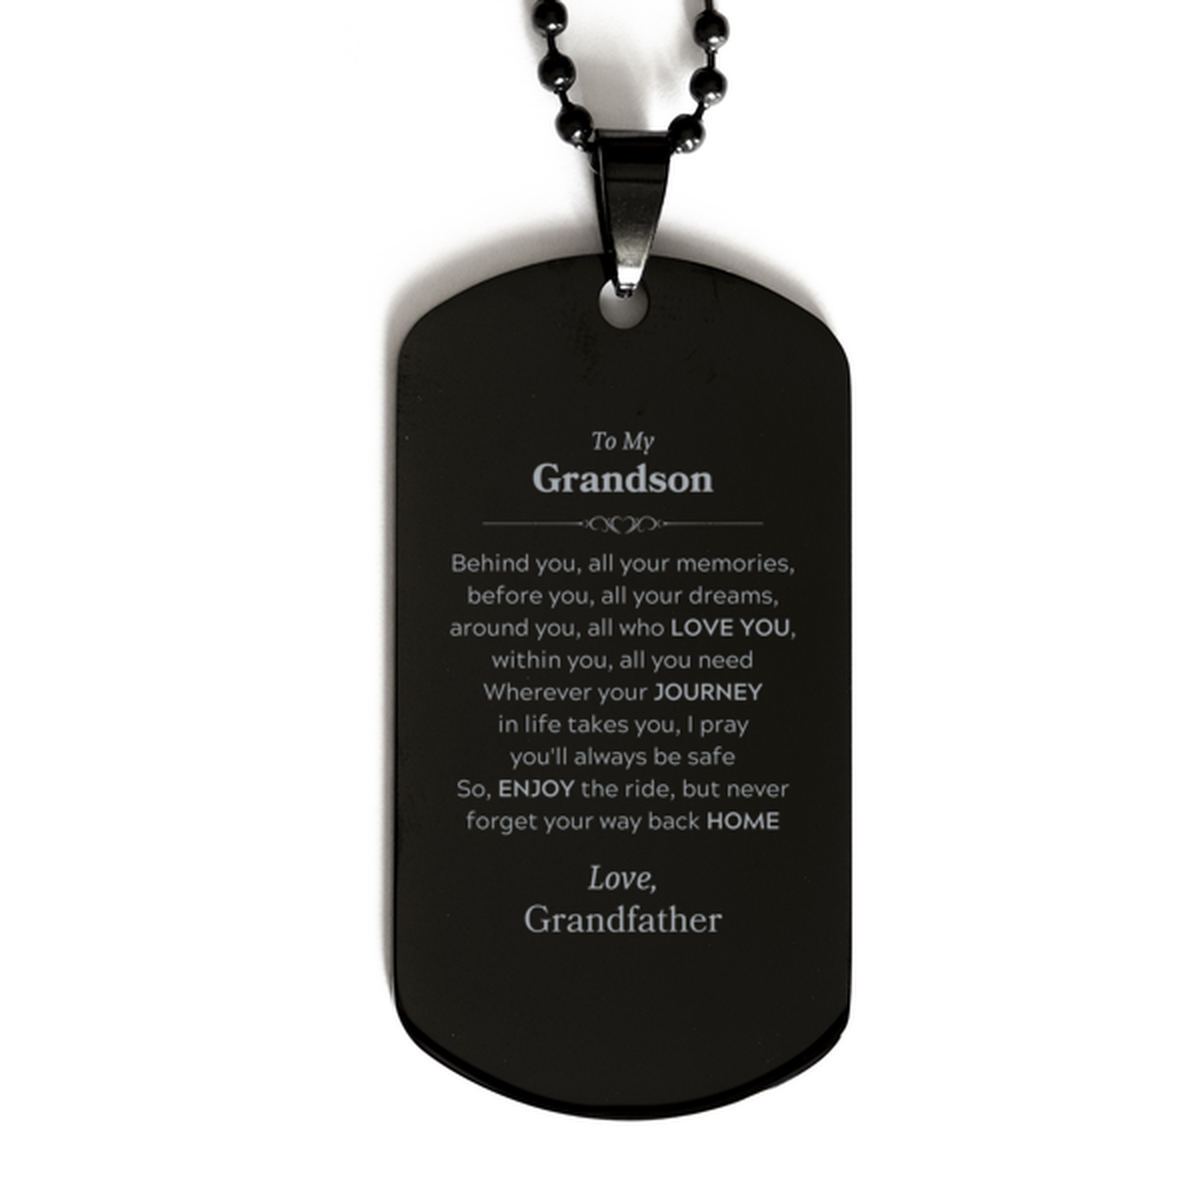 To My Grandson Graduation Gifts from Grandfather, Grandson Black Dog Tag Christmas Birthday Gifts for Grandson Behind you, all your memories, before you, all your dreams. Love, Grandfather